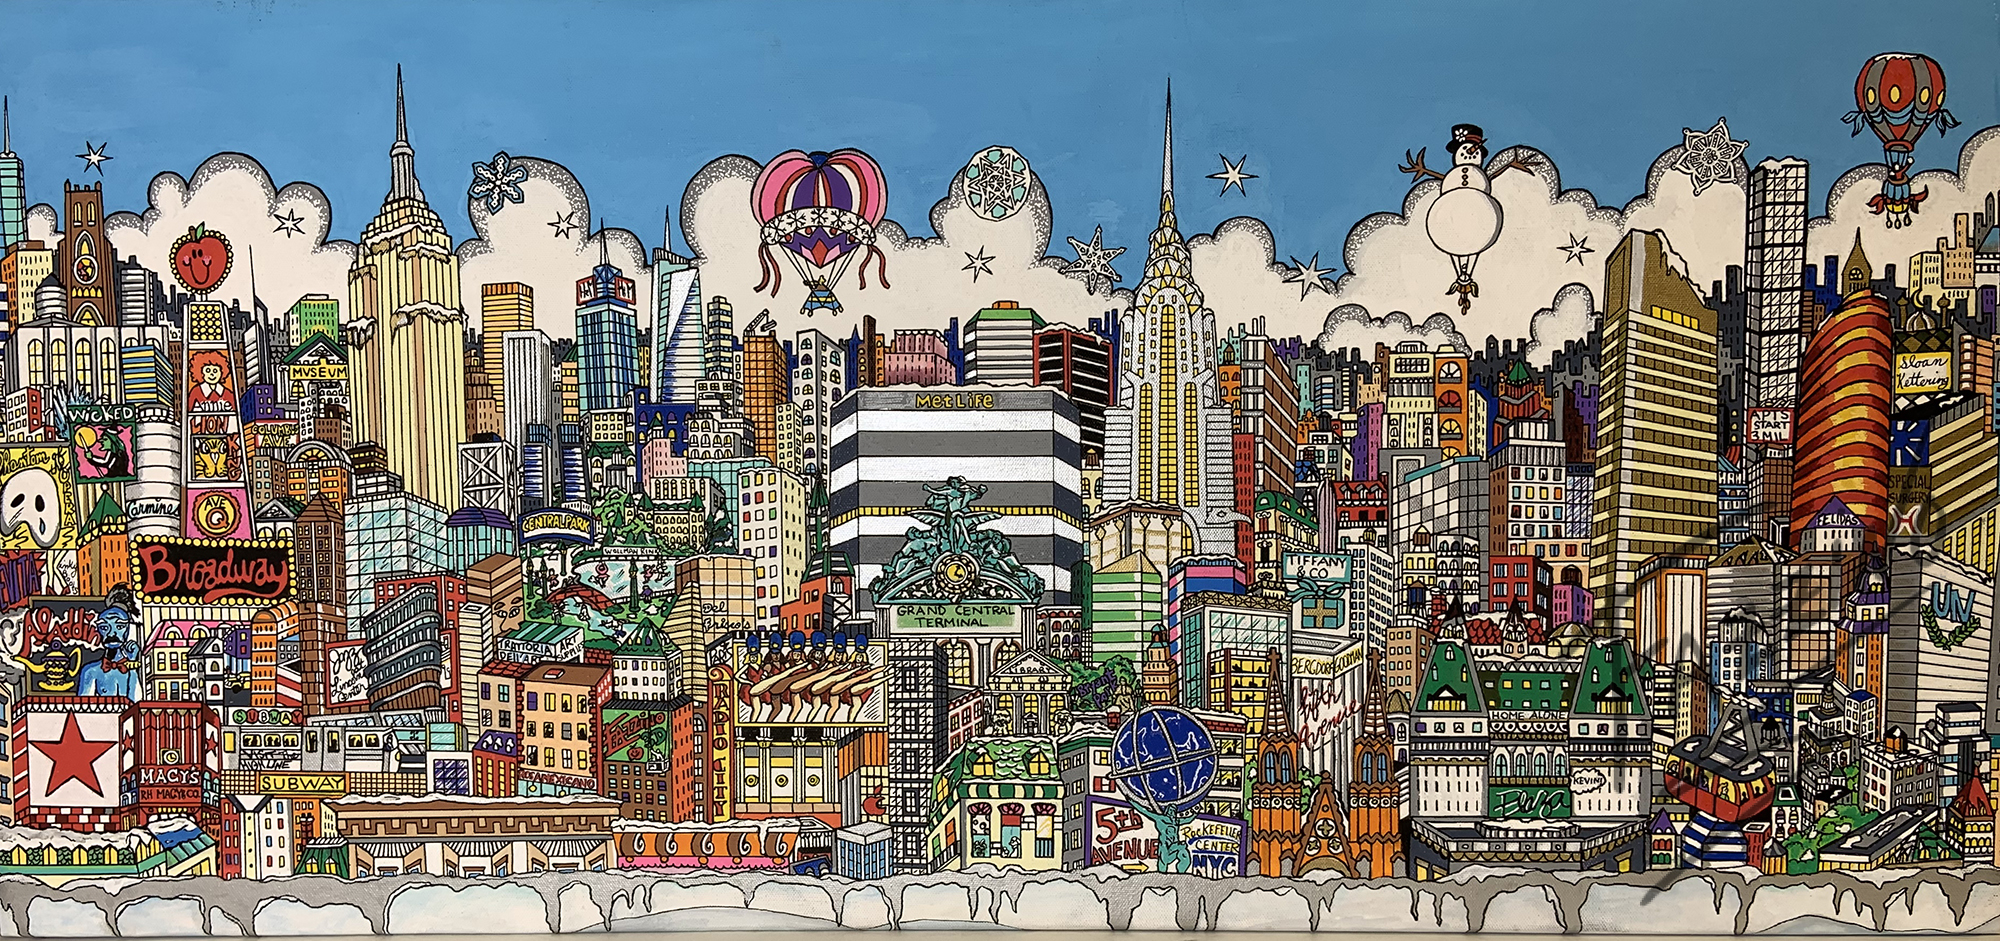 A wintry frozen New York City, with a collage of buildings and snowman balloon floating above